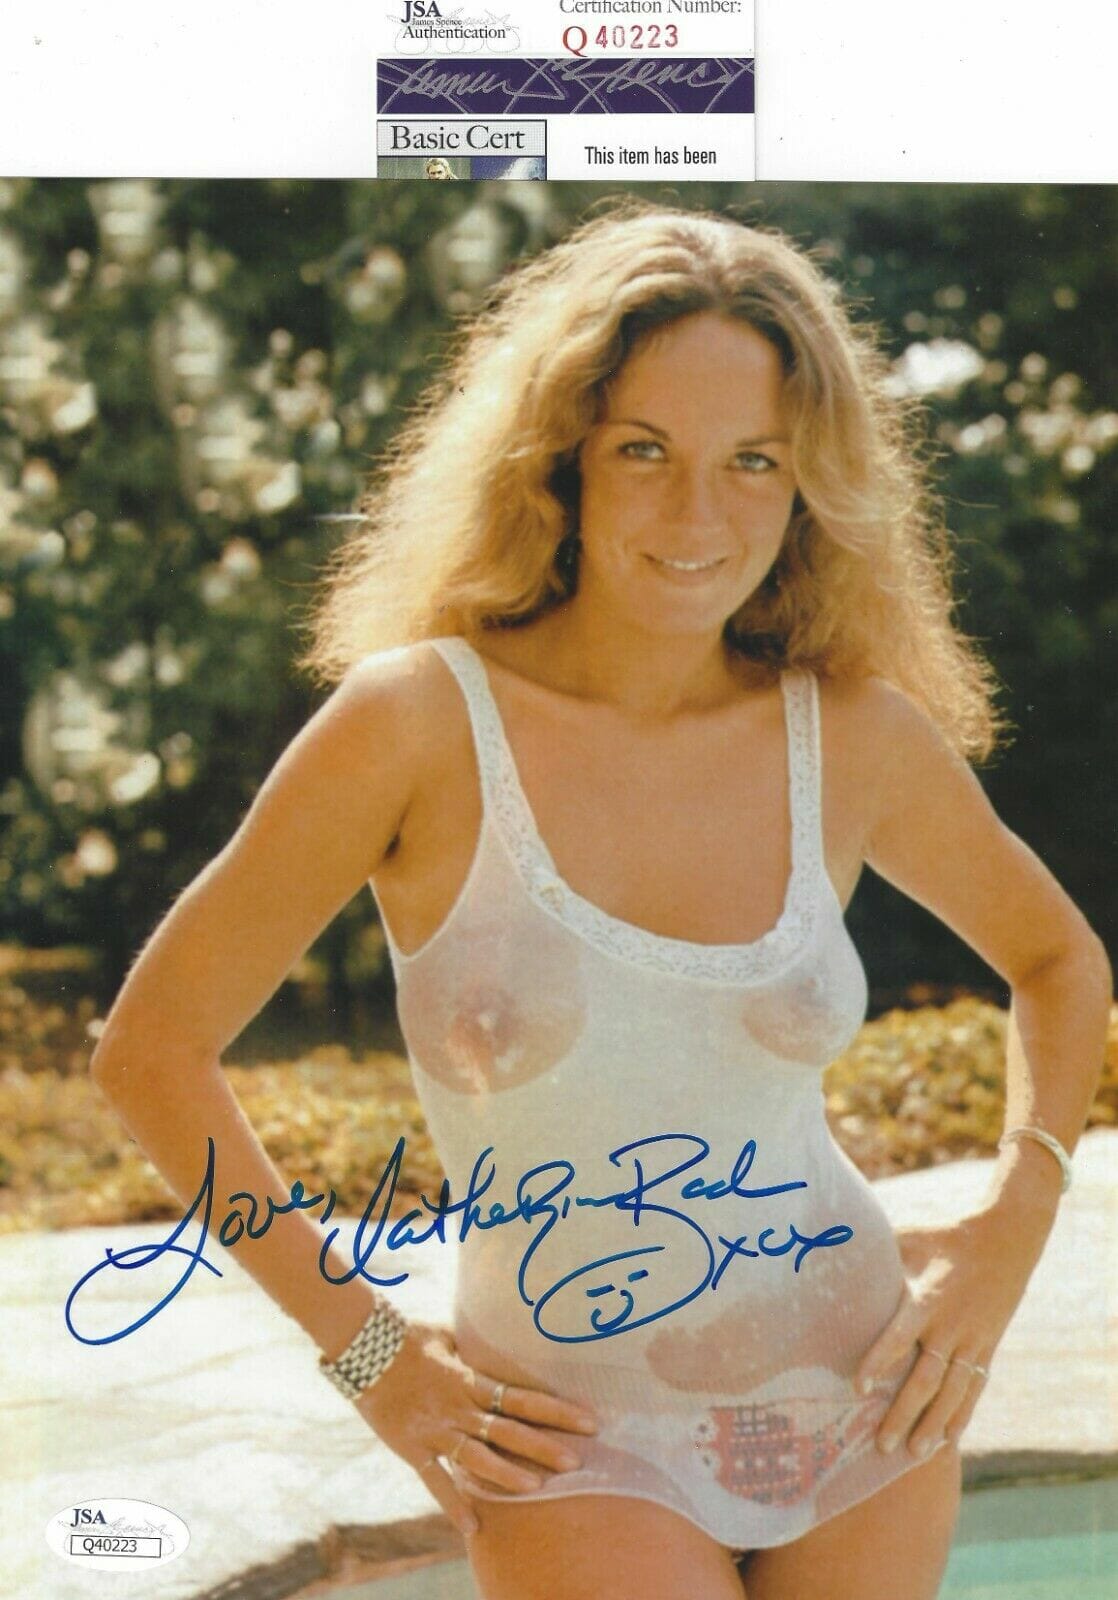 david kenet recommends catherine bach sexy pic